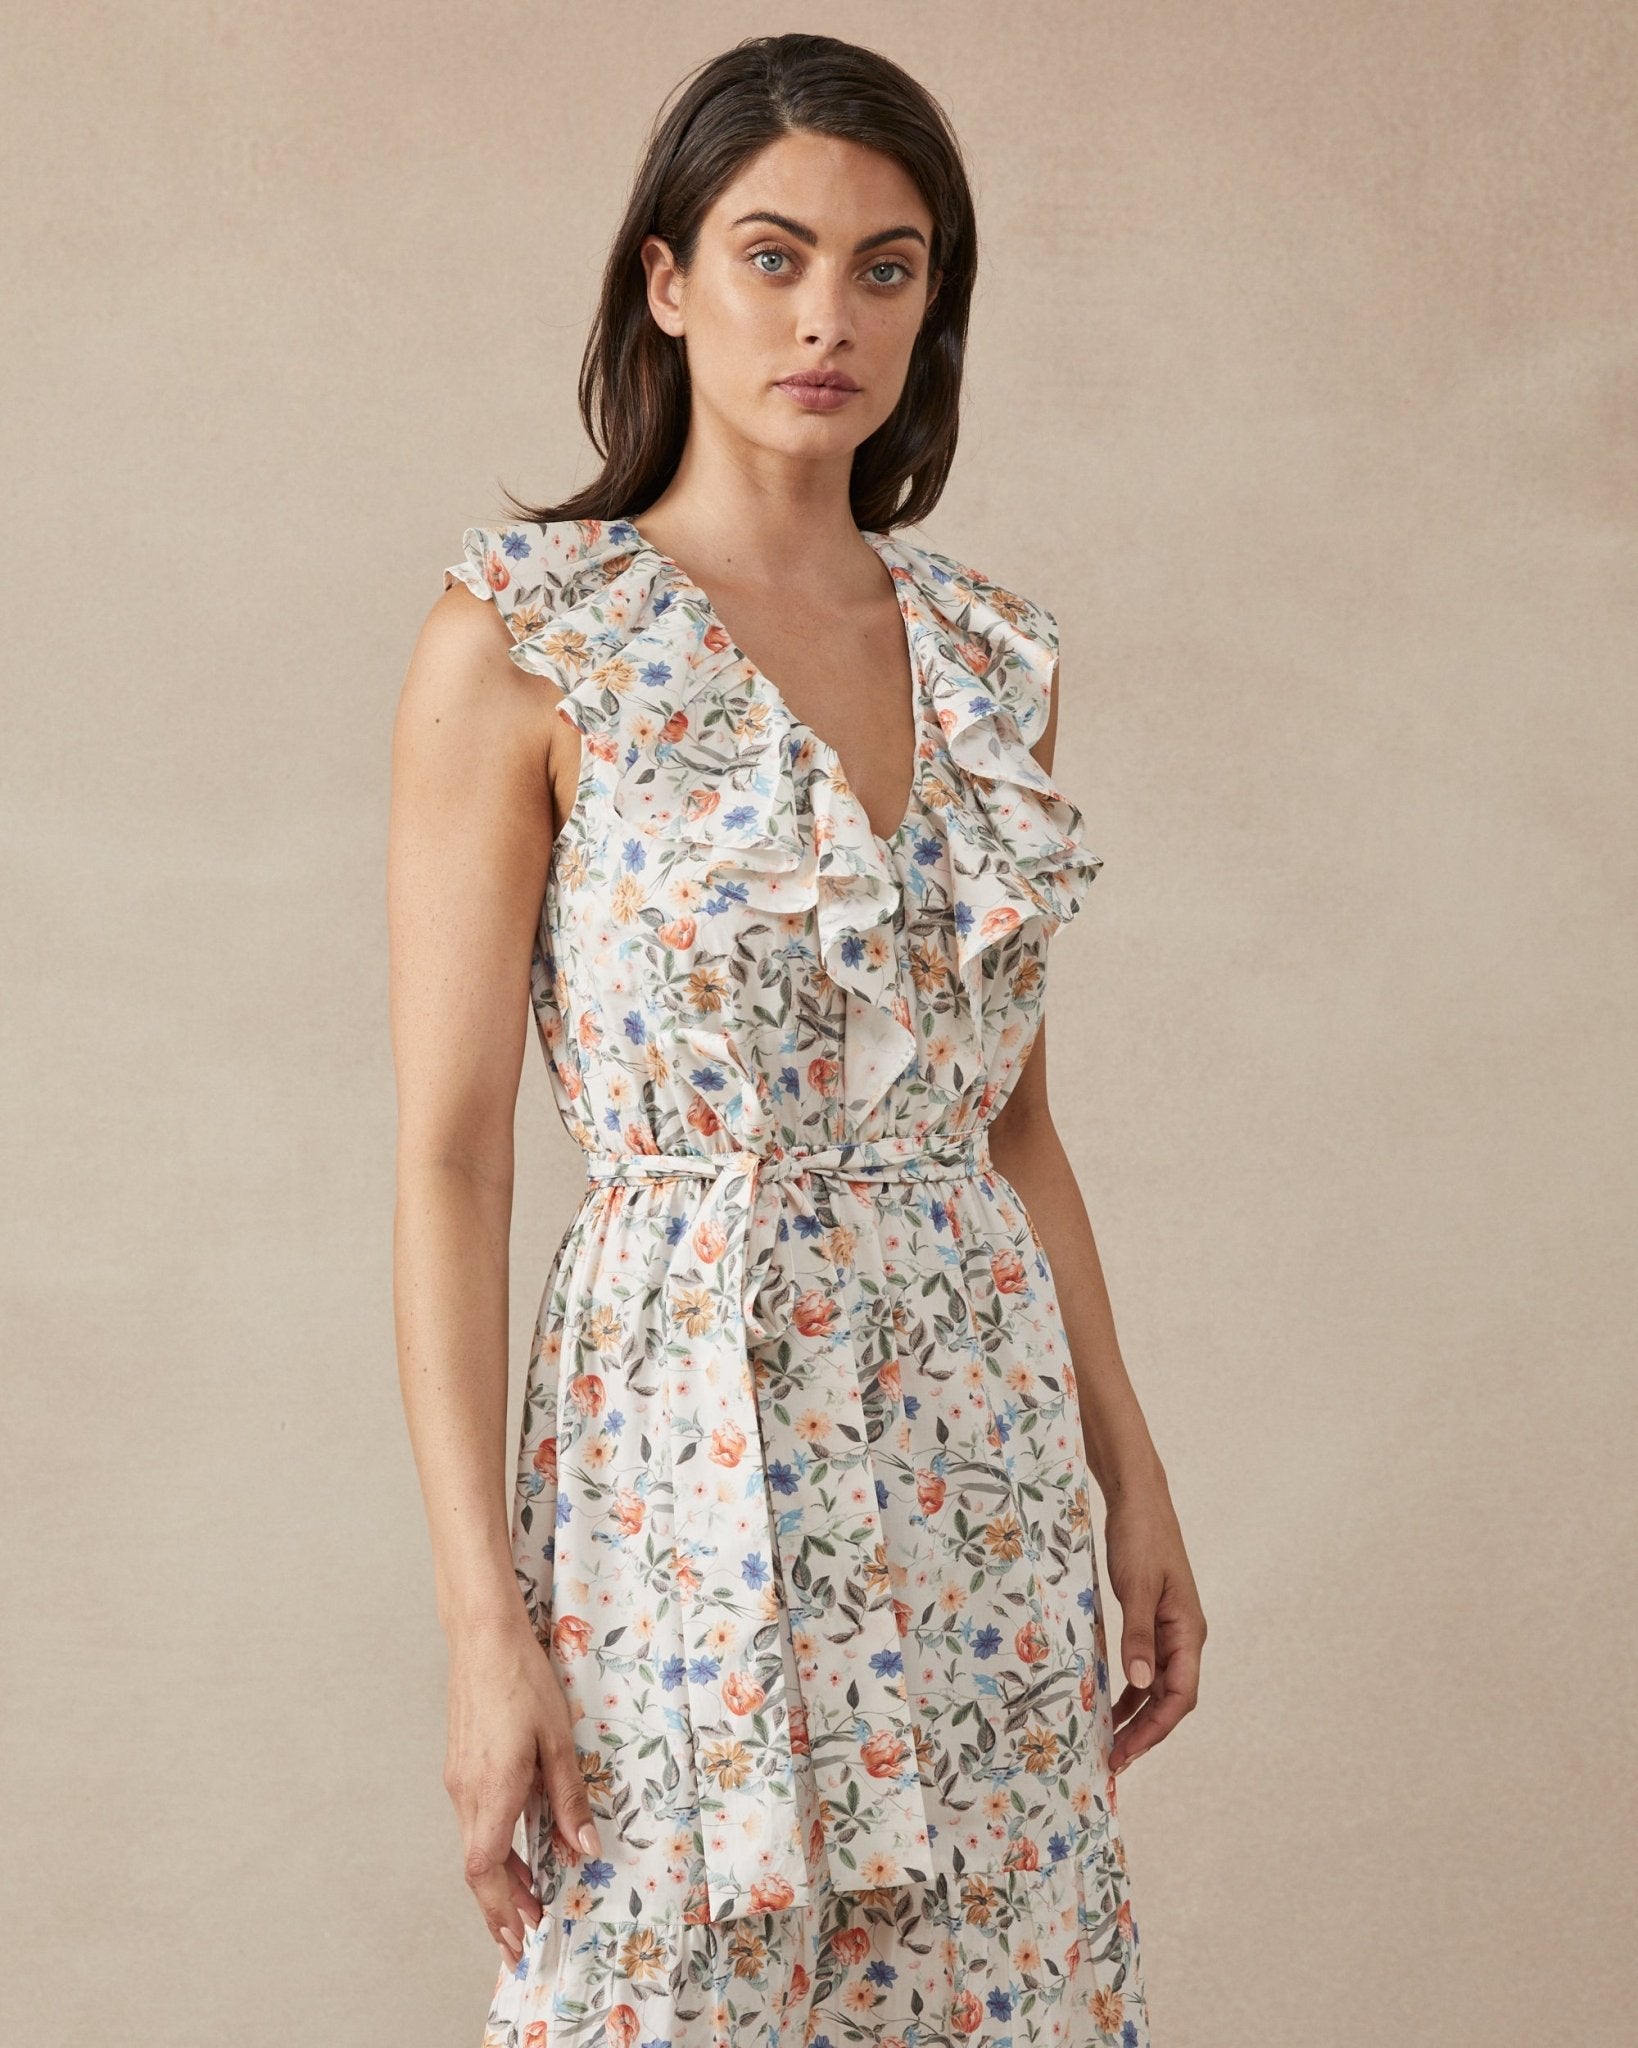 Shop Patty Dress in Rhapsody Floral by Maggie The Label - Maggie The Label